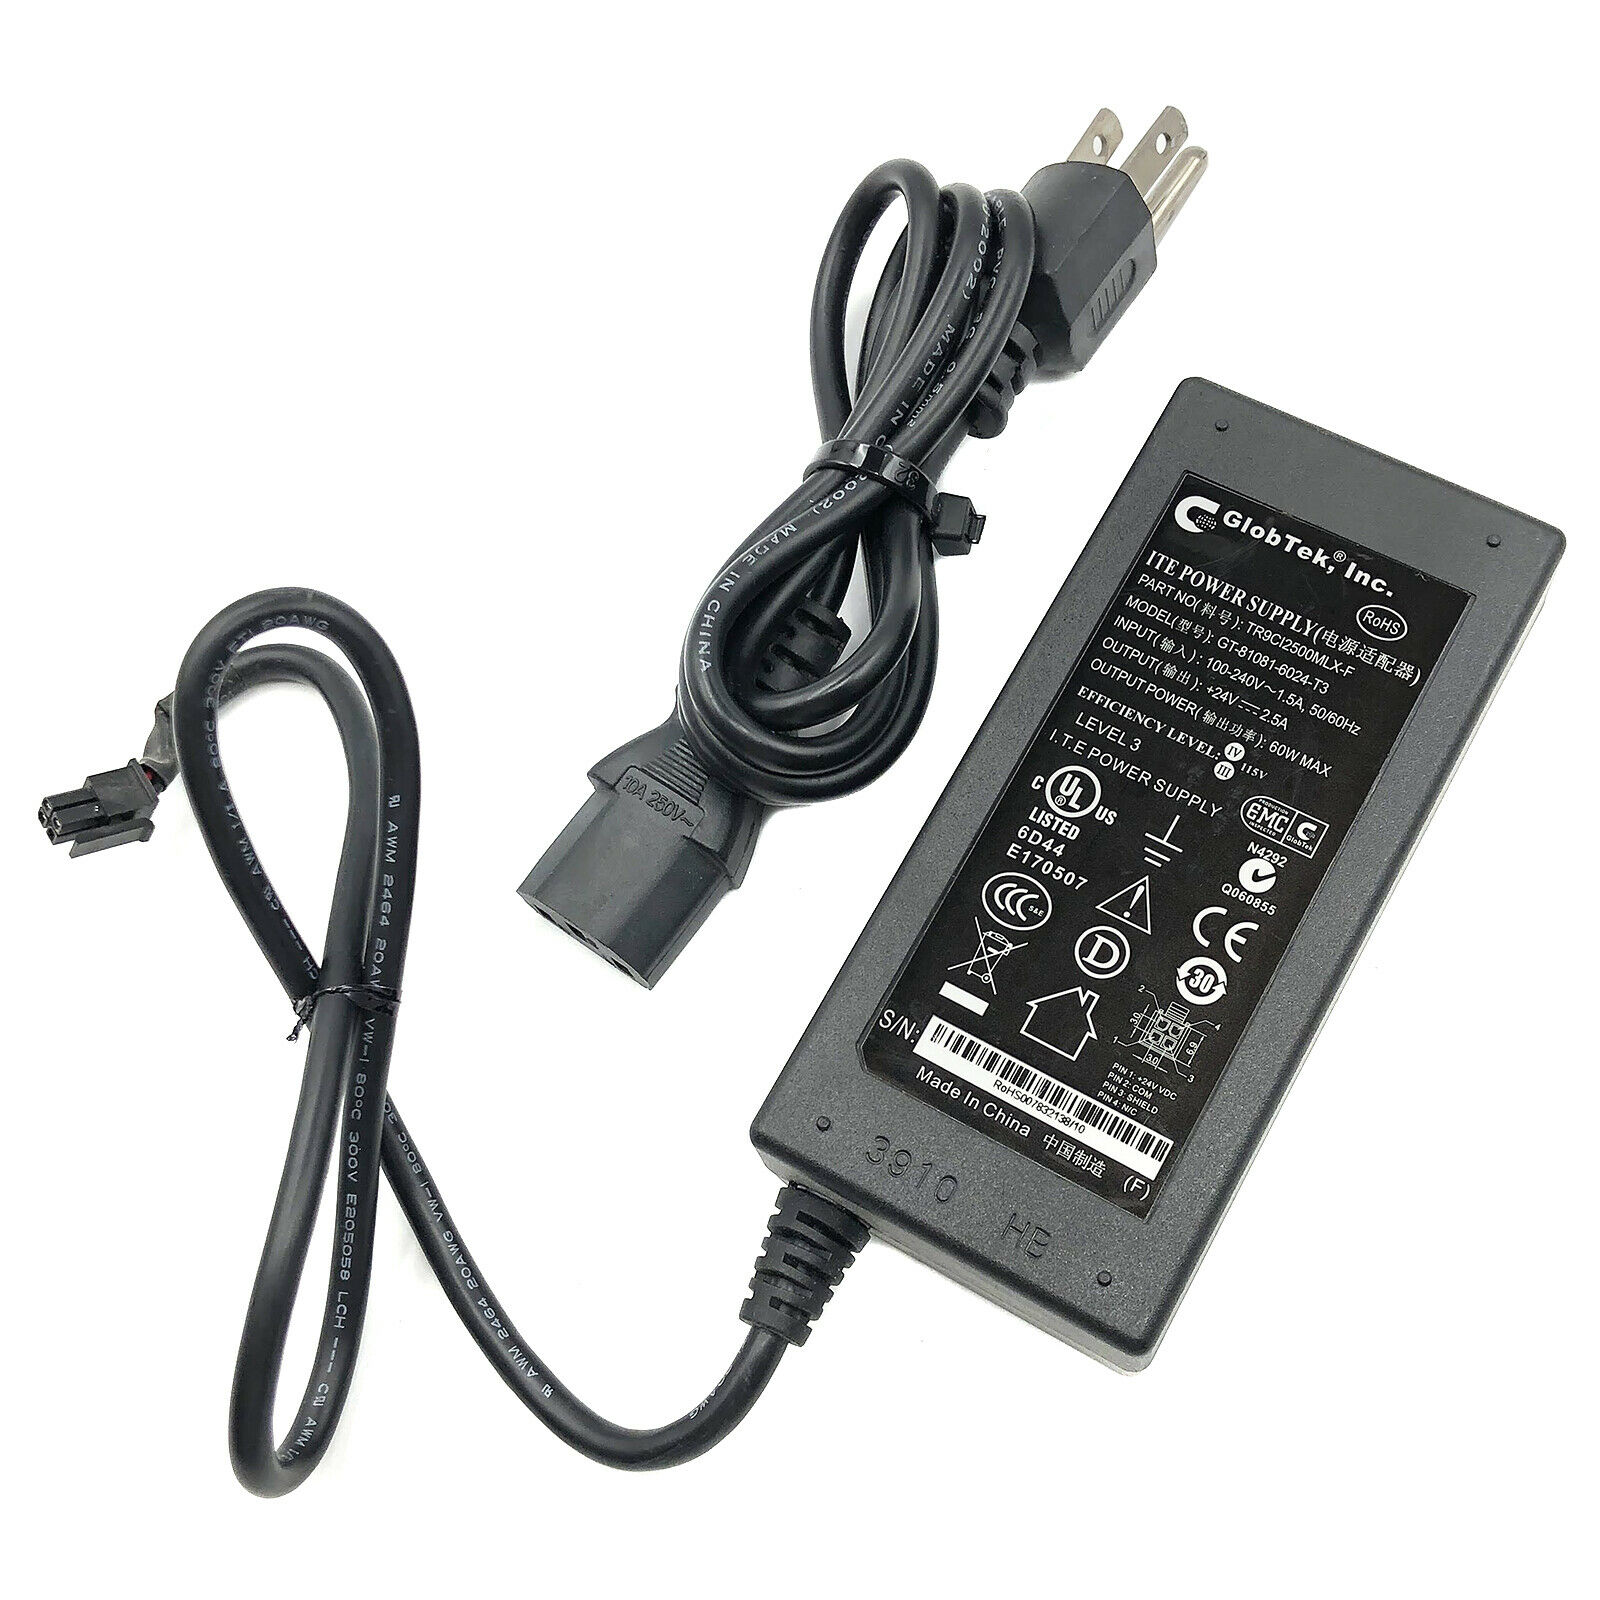 Genuine Globtek GT-81081-6024-T3 AC Adapter 24V Power Supply ATX 4 Pin w/PC OEM Color: Black Brand: Globtek Cable Le - Click Image to Close